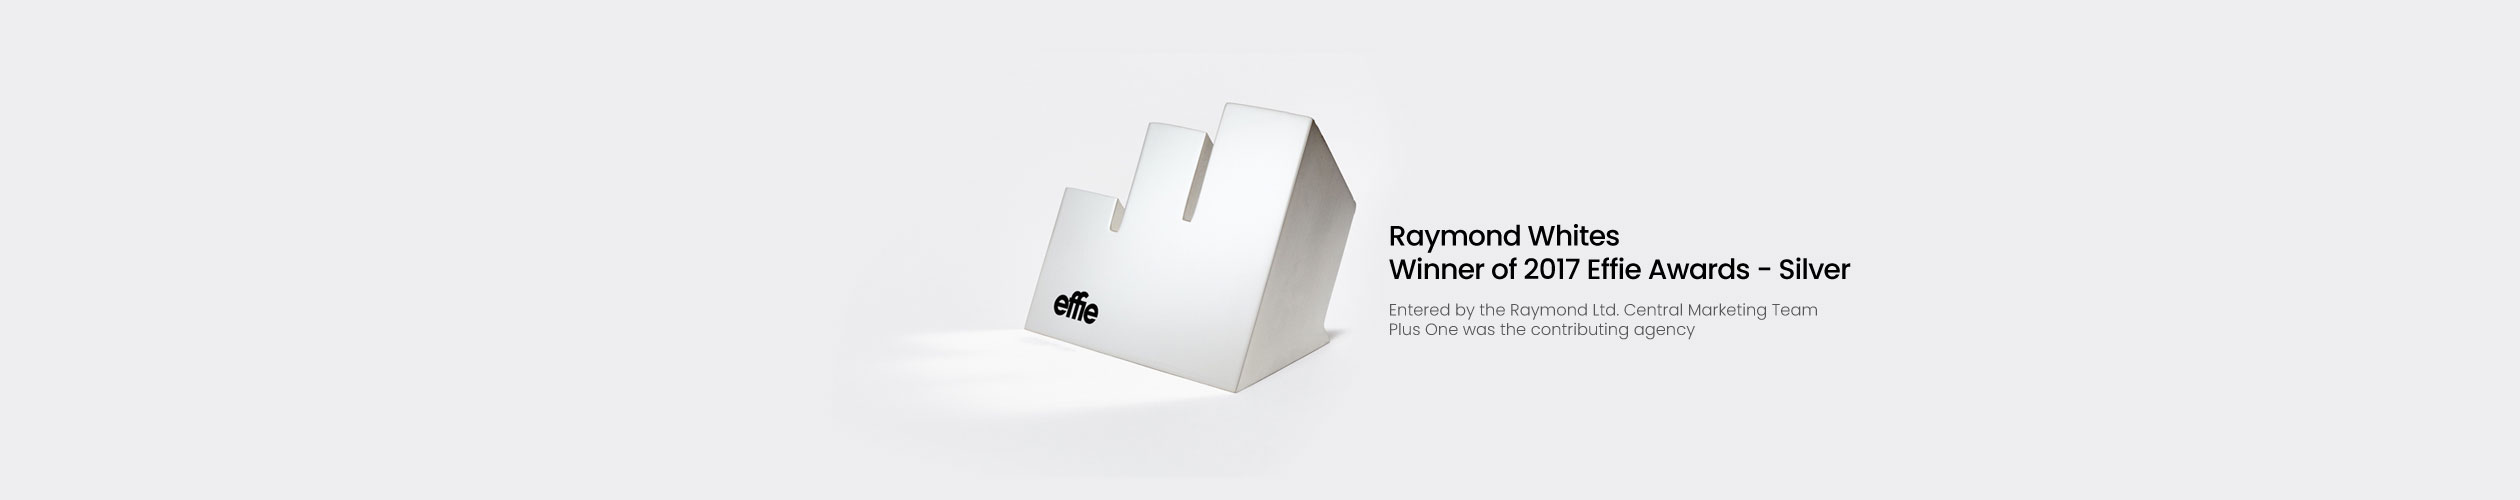 awards-for-projects-Raymond-Whites